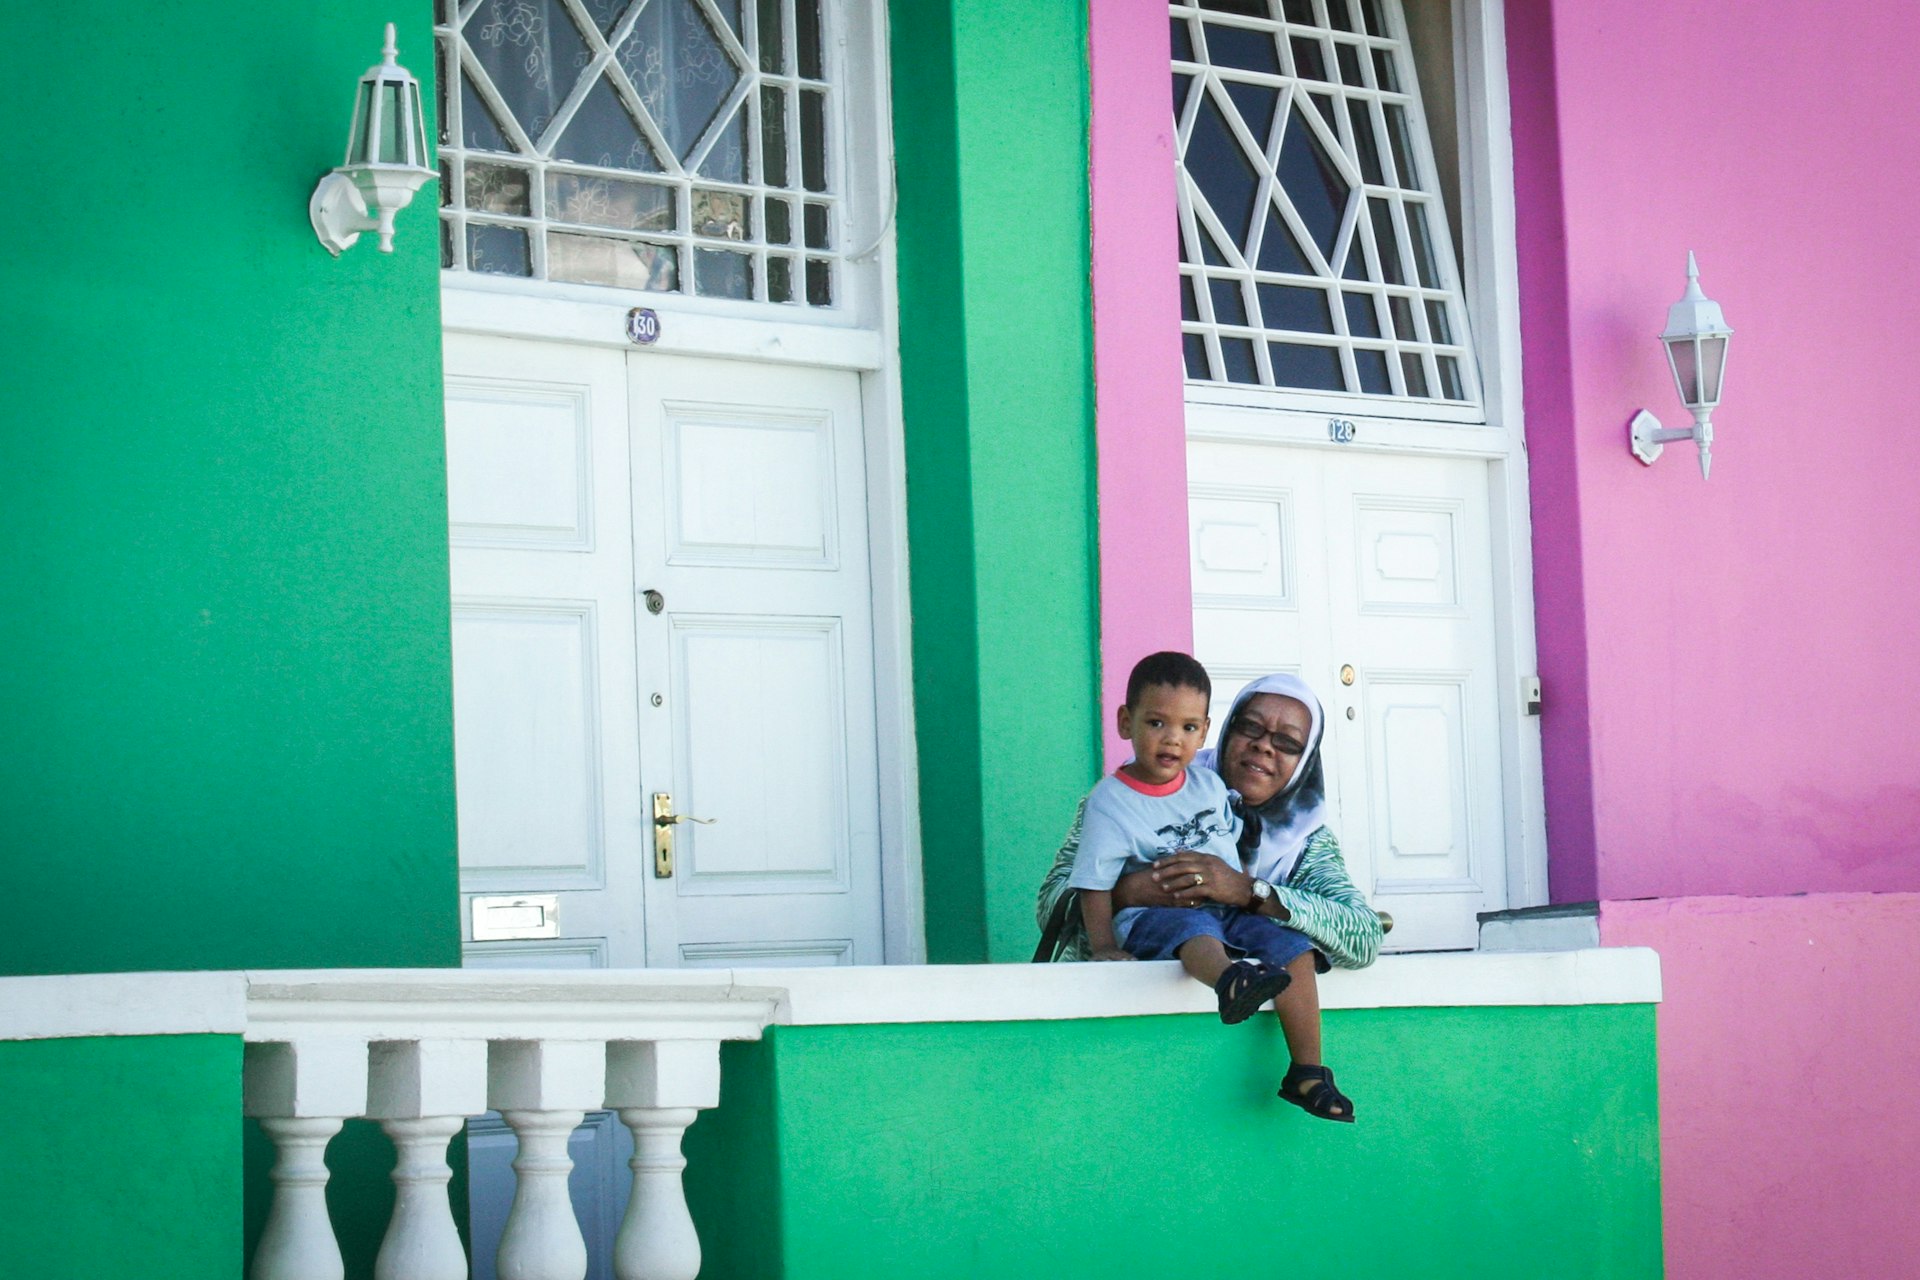 A woman stands with a child who is sat on a wall against a colorful pink and green building